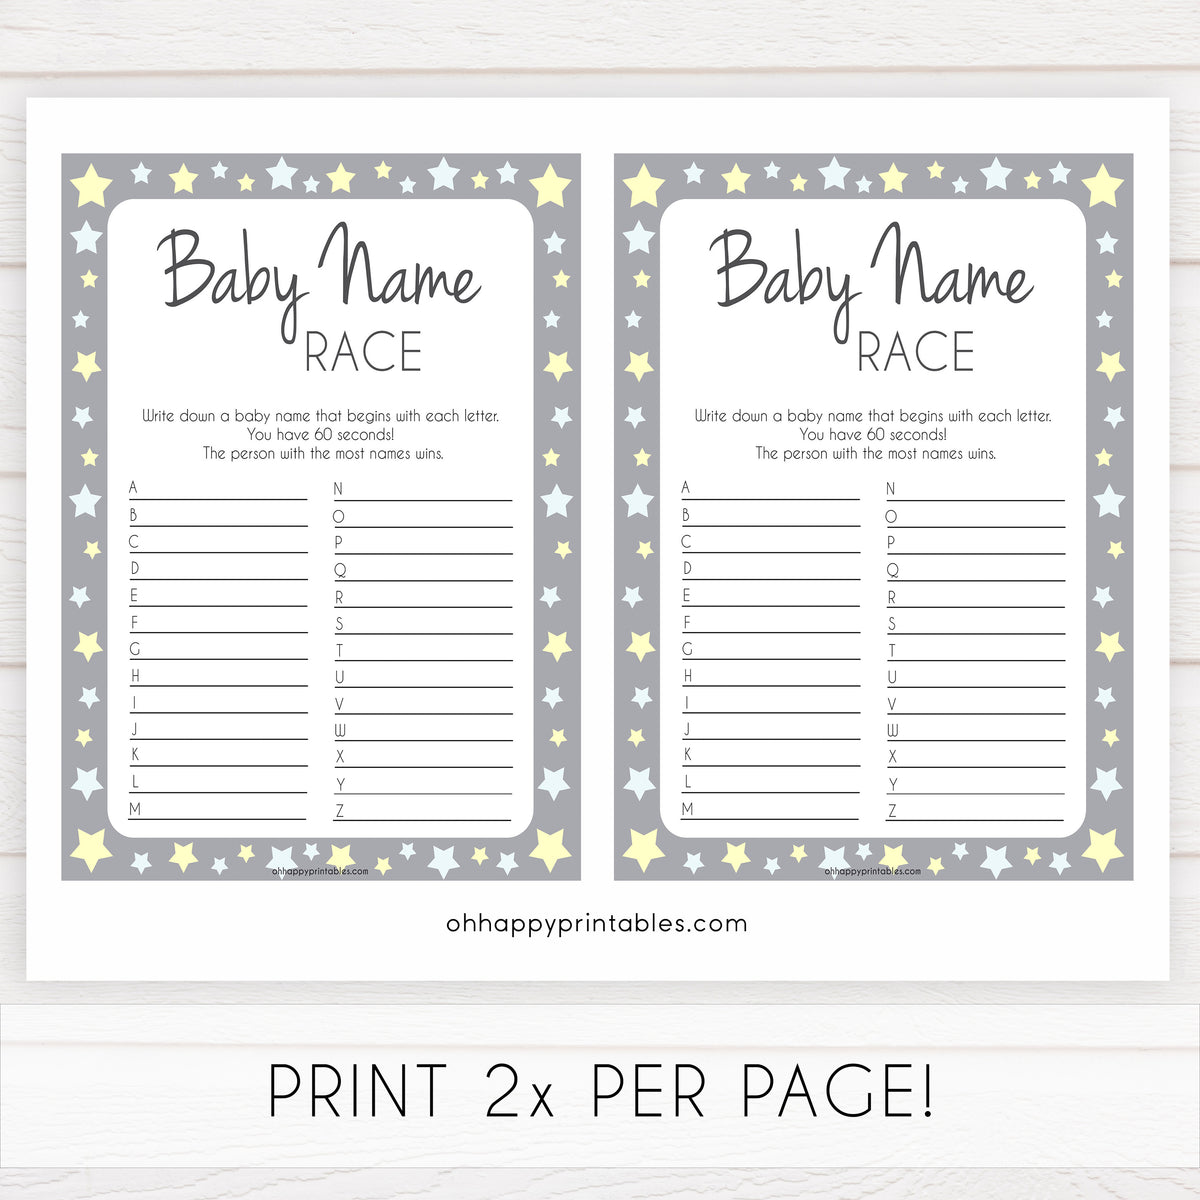 baby-name-race-game-printable-grey-yellow-stars-baby-shower-games